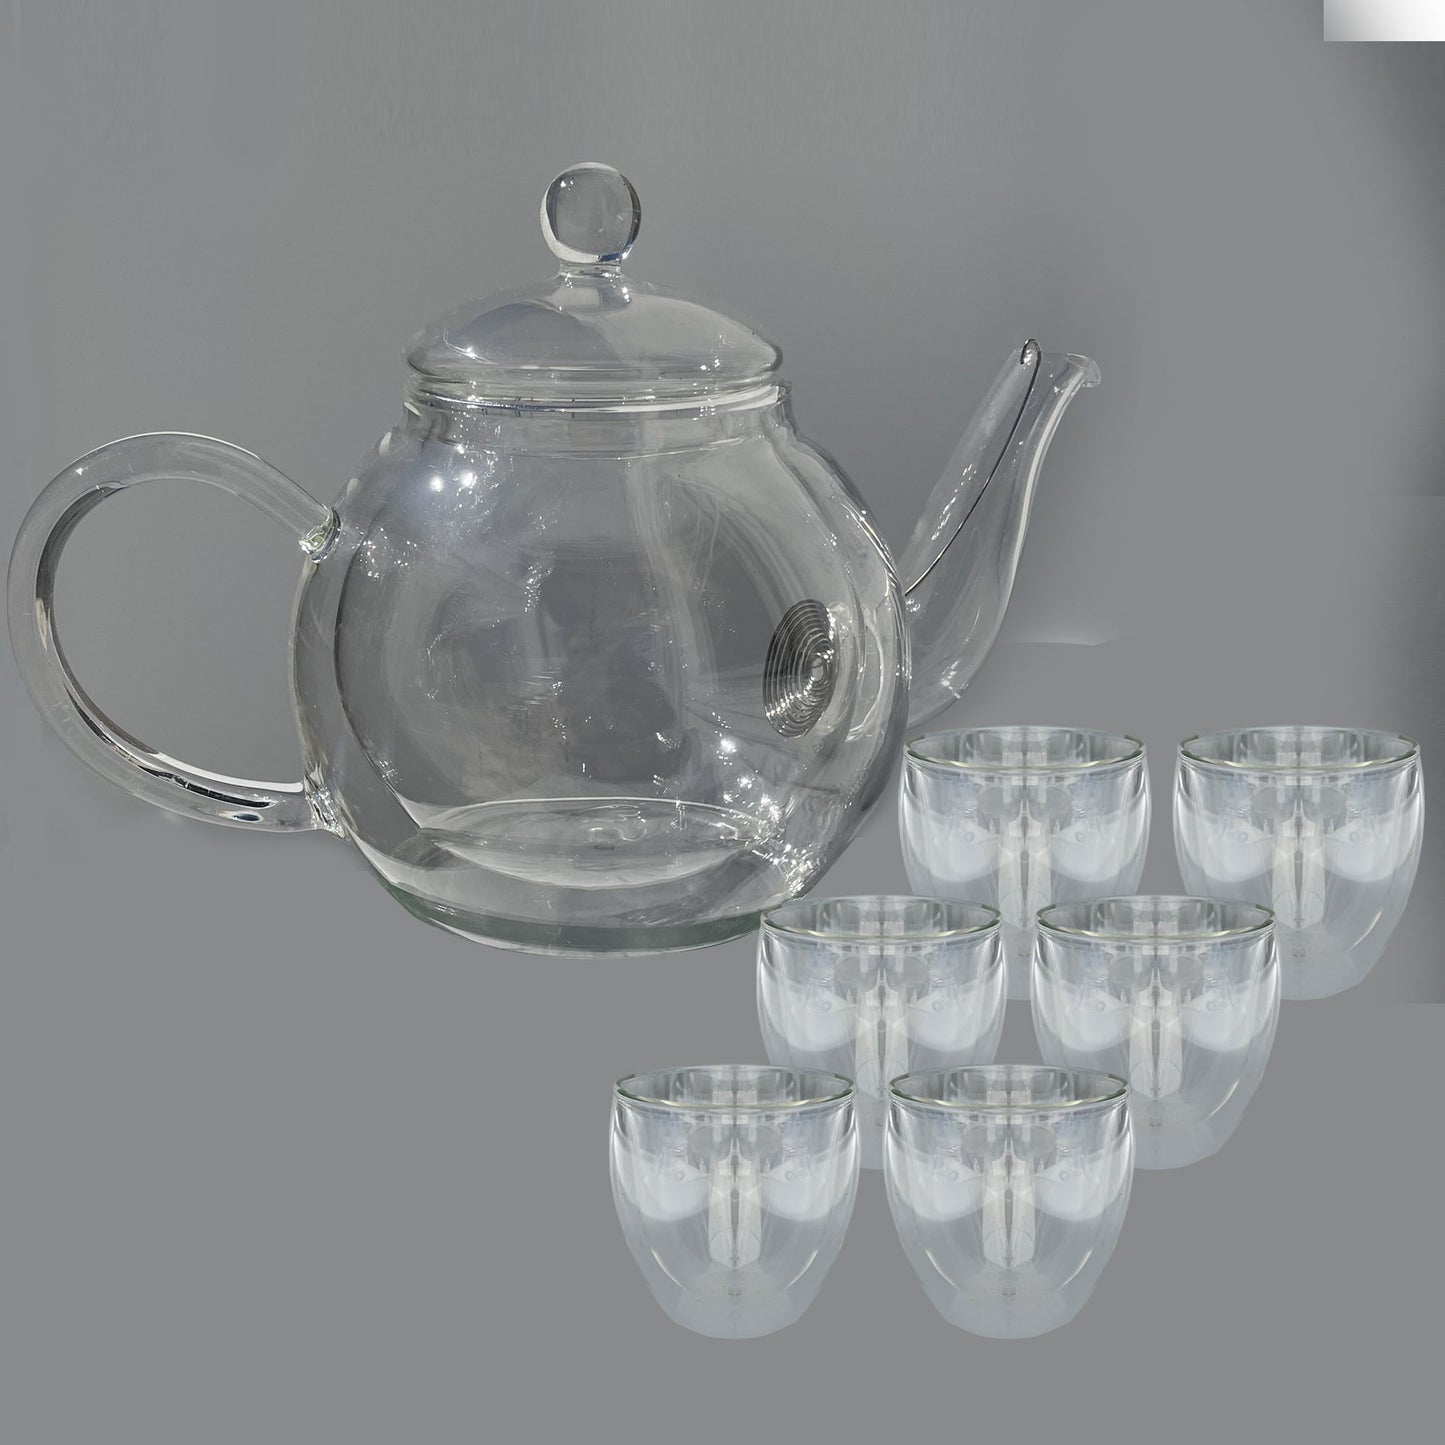 Round Shaped Double Layer Glass Teapot (530 ML), Teapot with Removable Infuser and Lid, Heatproof Safe side handle with Cups